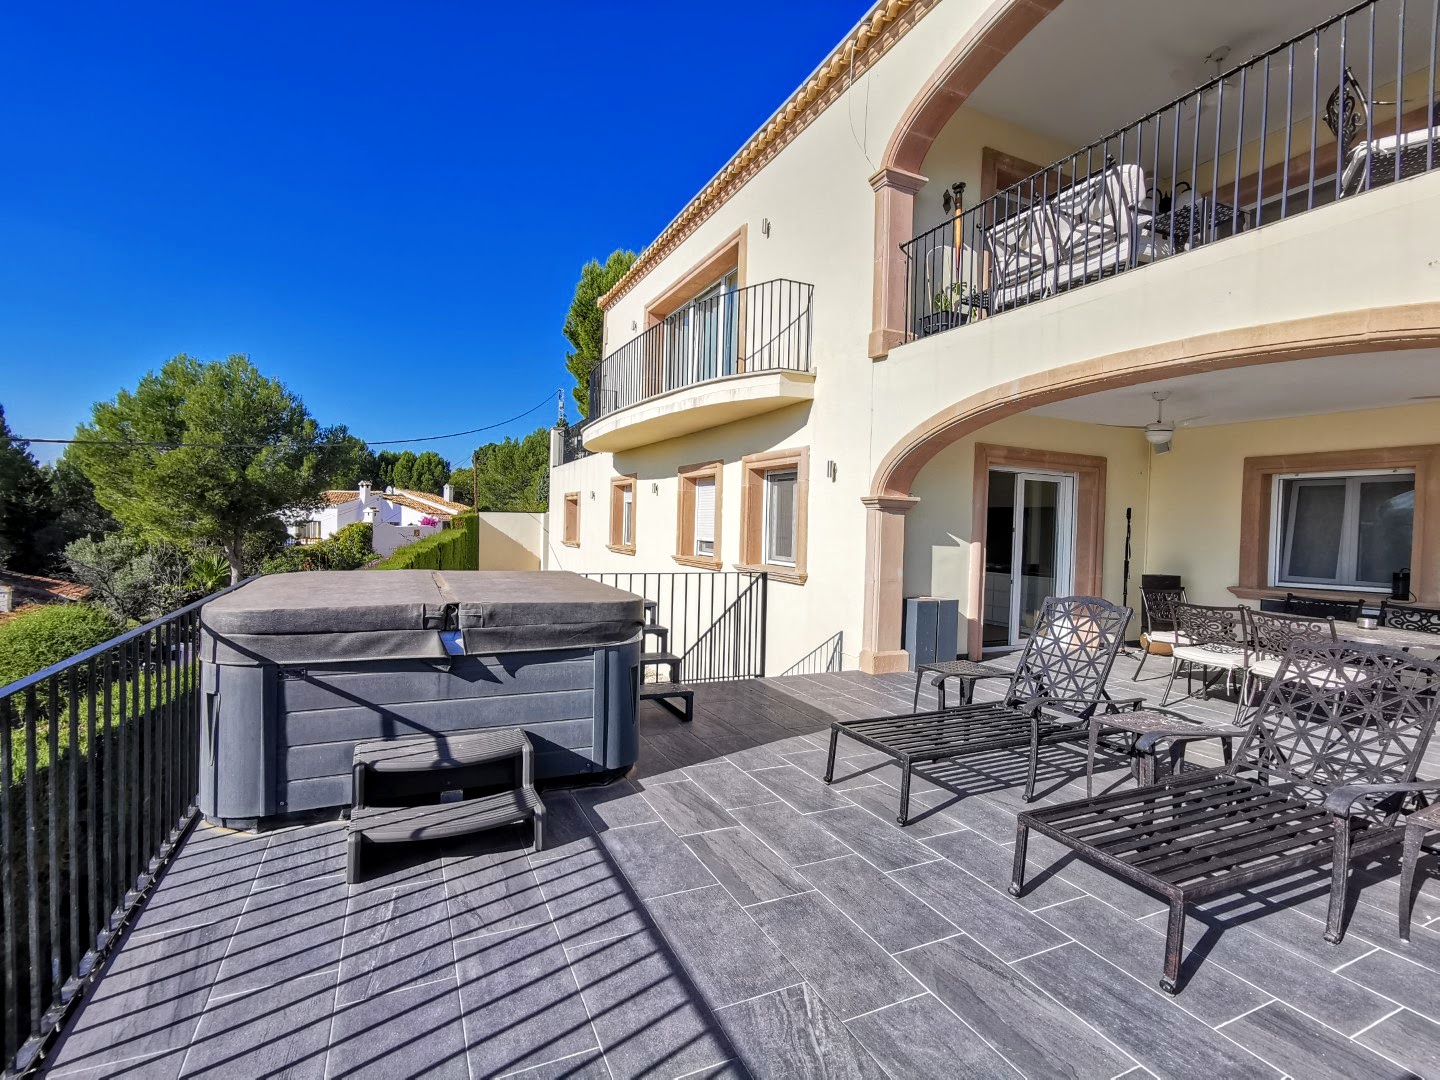 Modern villa for sale in Javea with spectacular open views on the Montgo